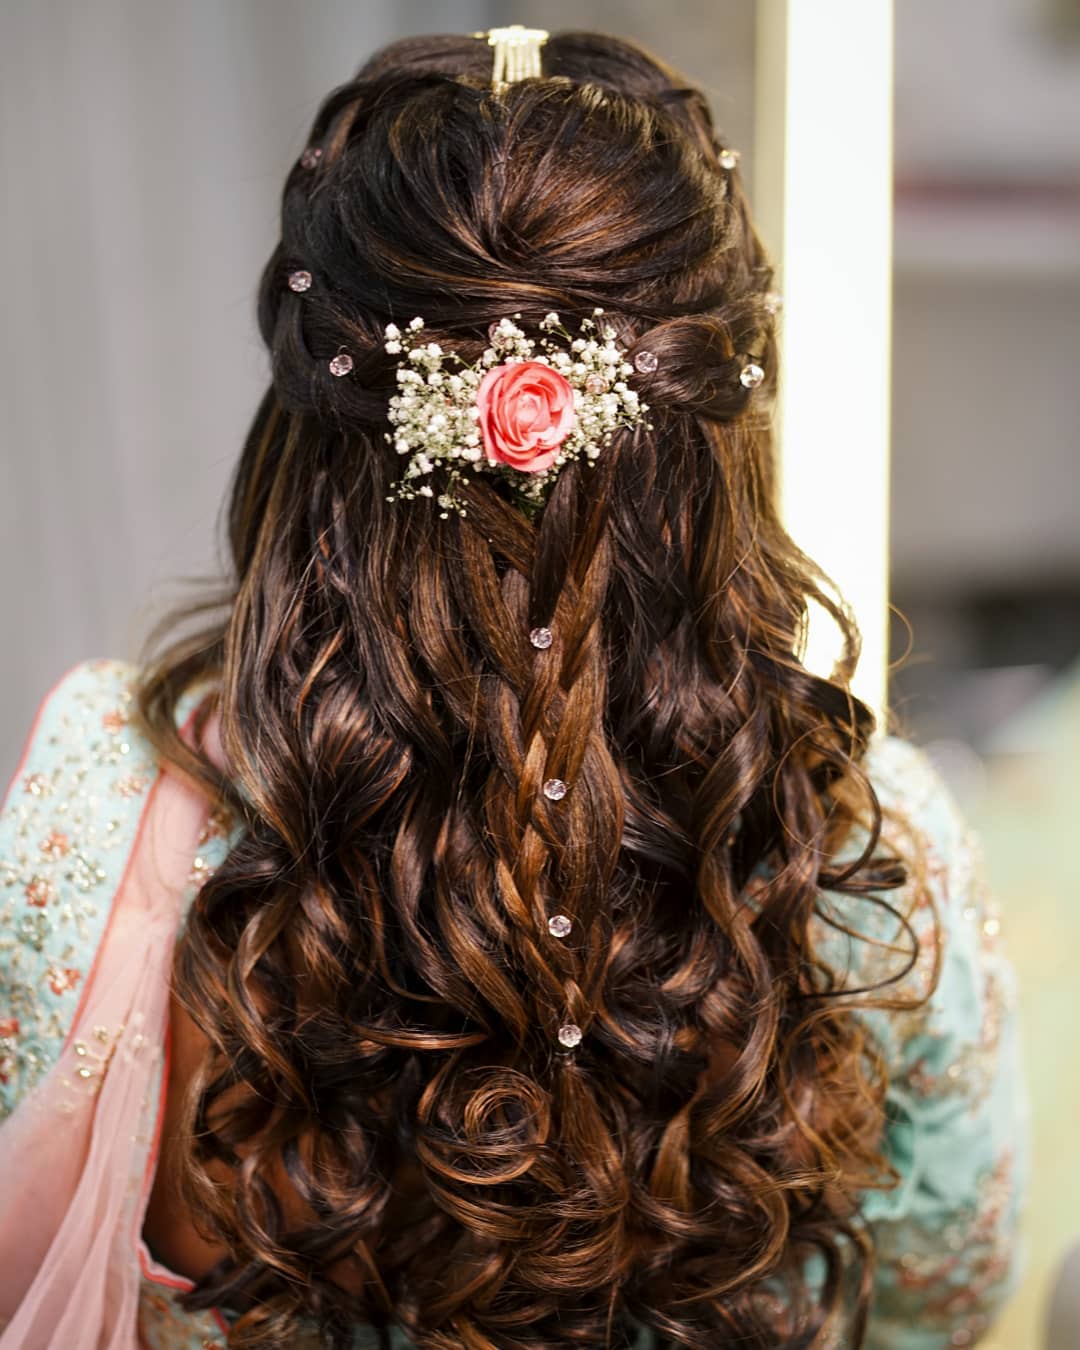 My sister's bridal hair trial was a complete fail - she did not go back |  The US Sun